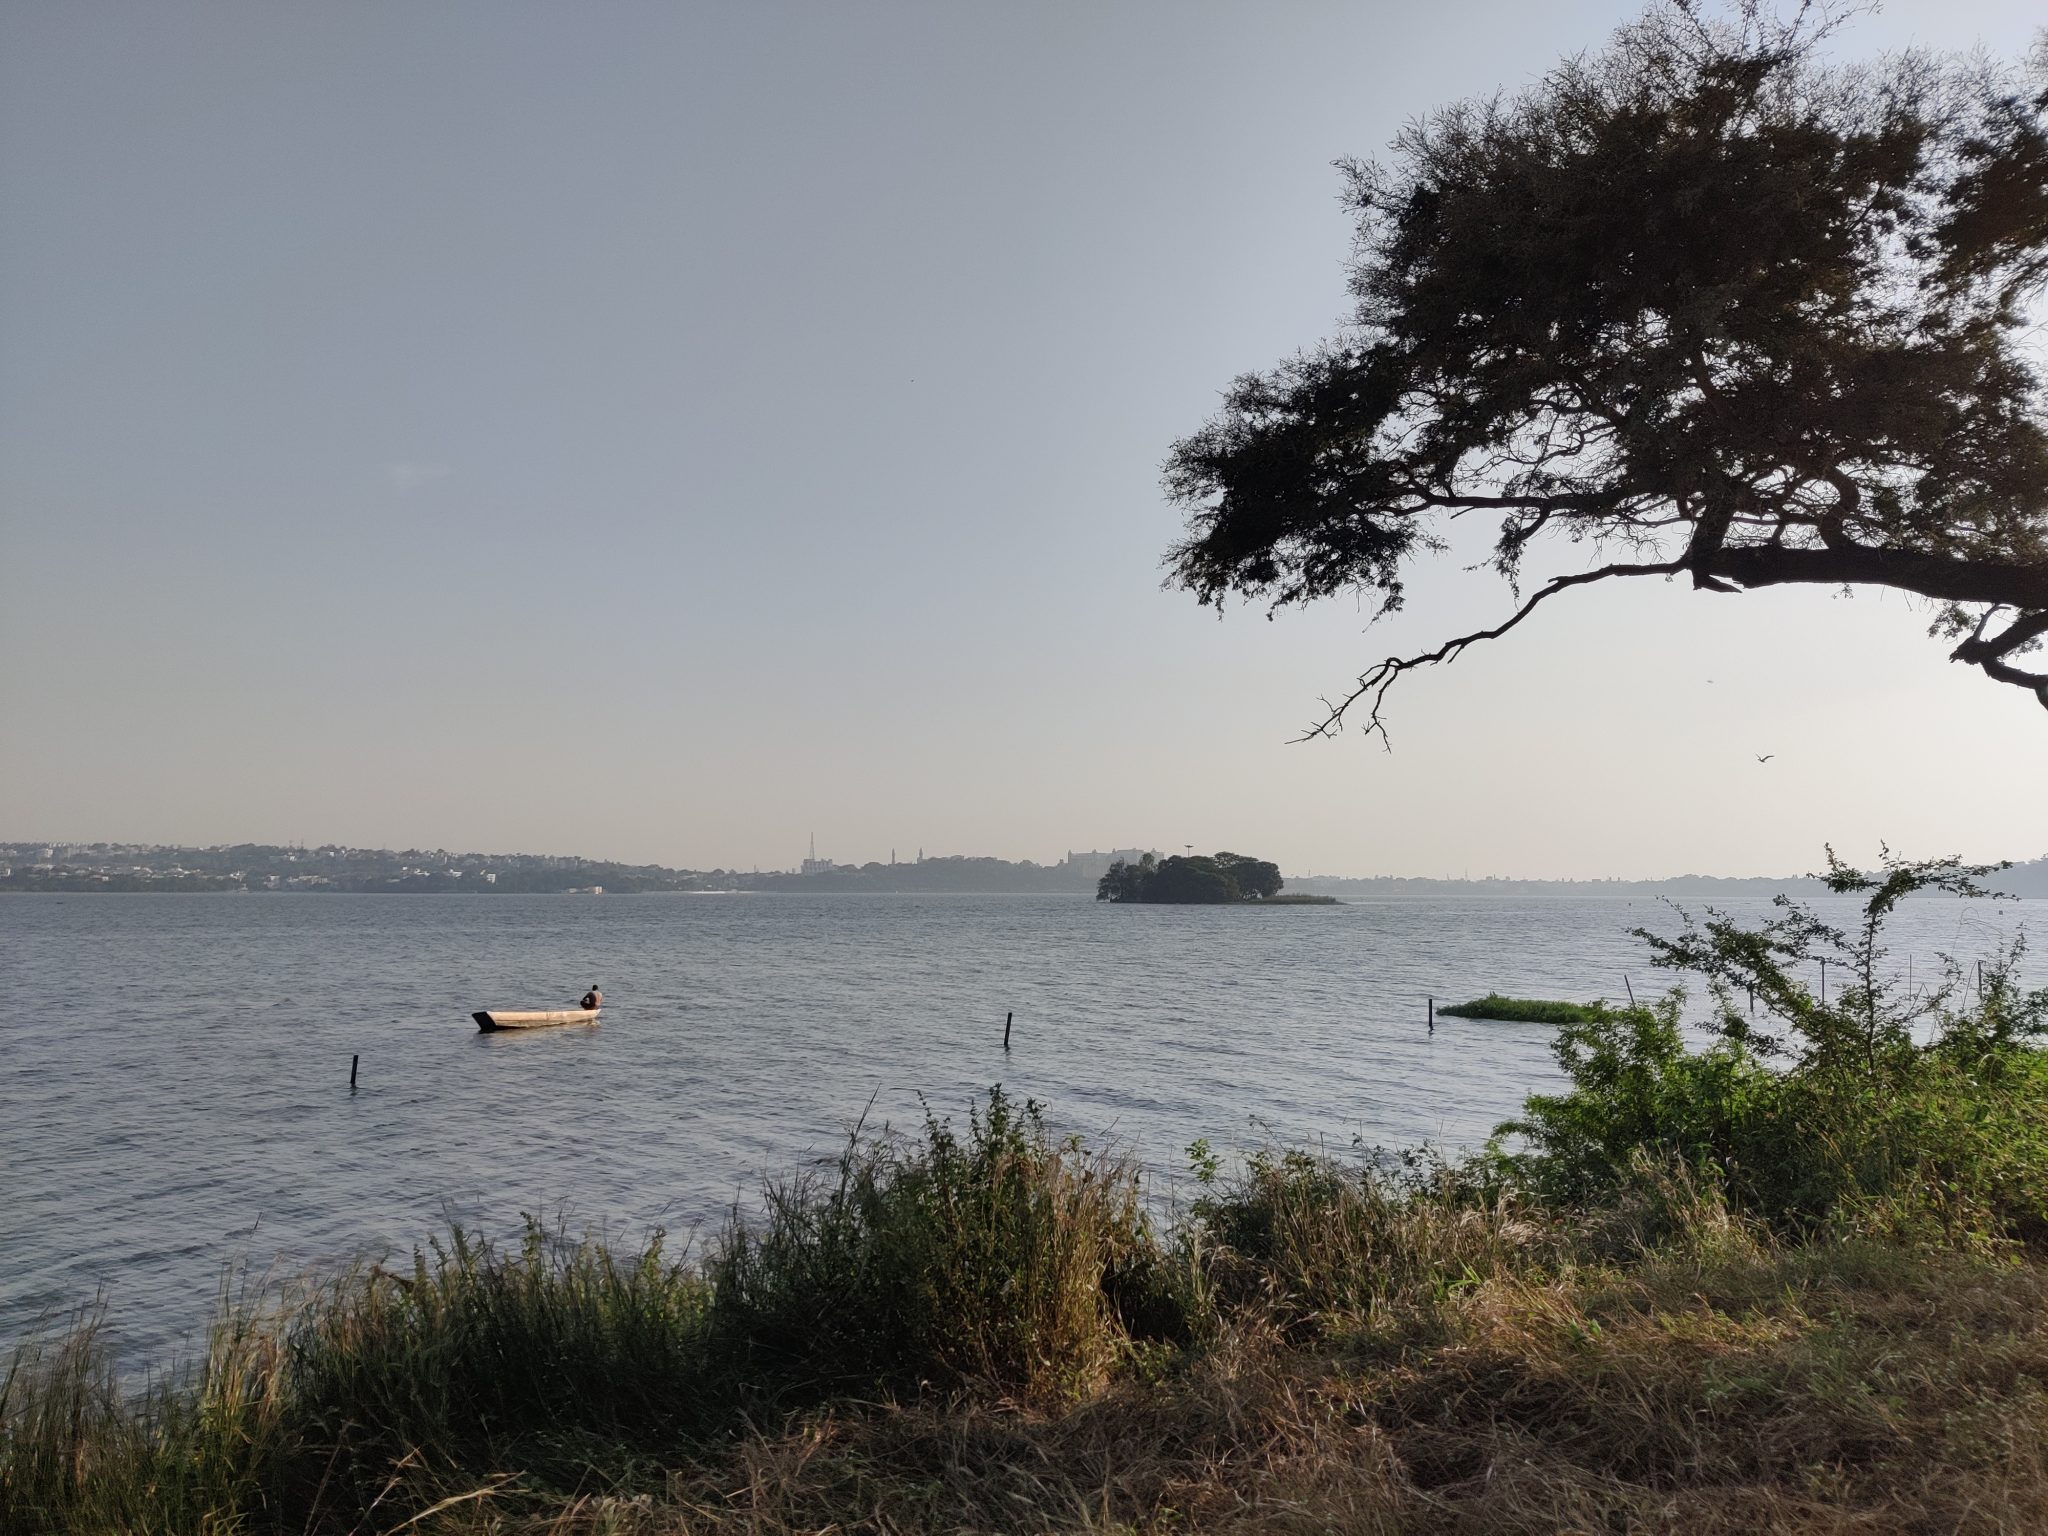 This photograph is captured from a lank bank of a fisherman, fishing in the Lake early morning in Bhopal City.